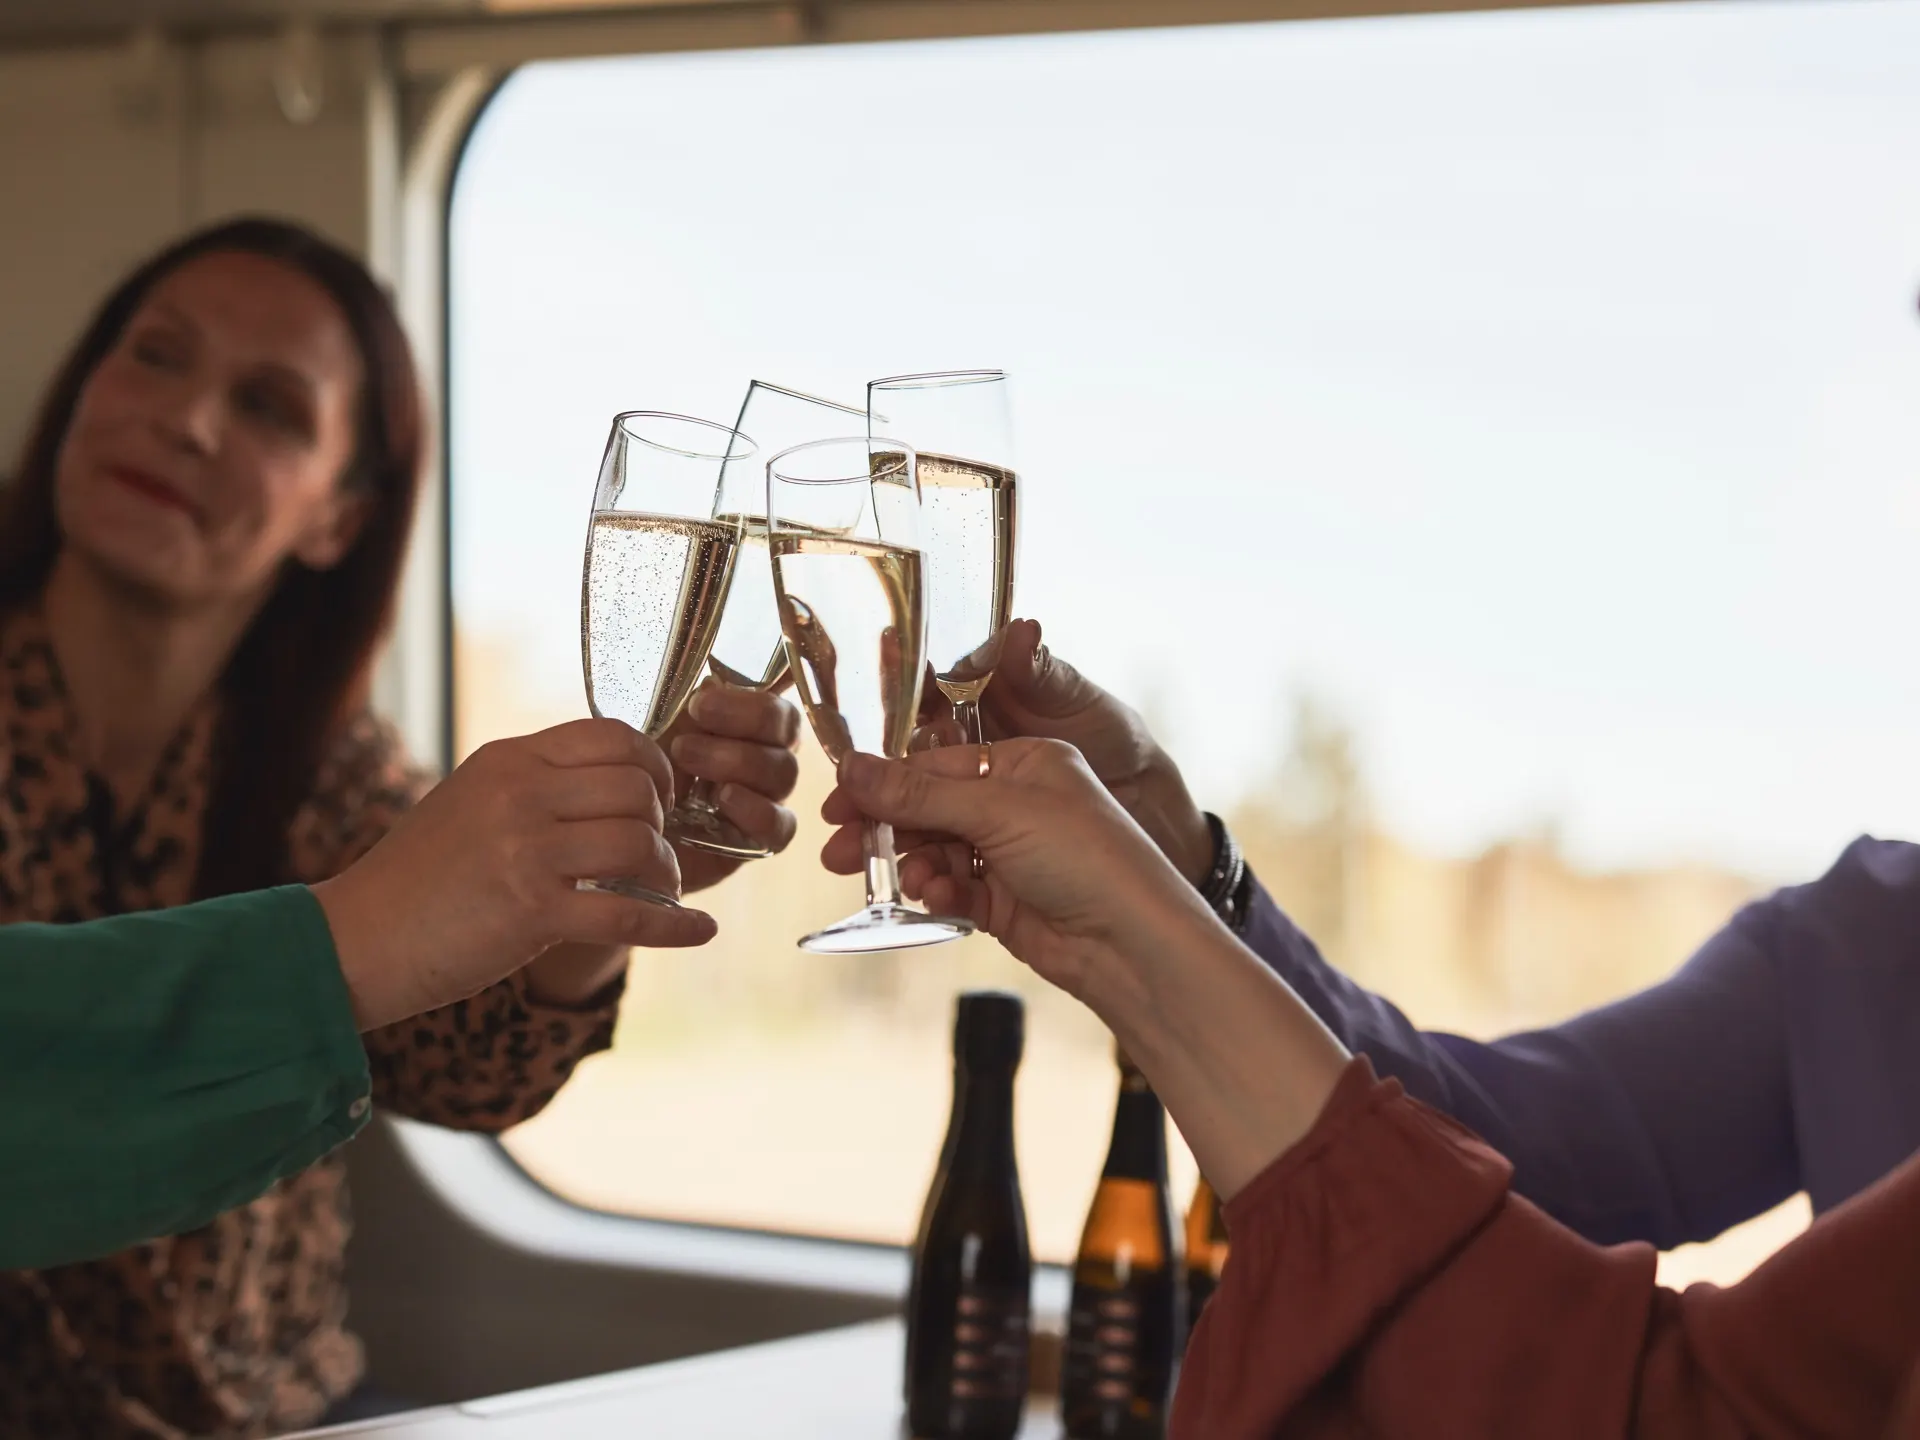 A group is having refreshments, such as sparkling wine and coffee, in the restaurant car.